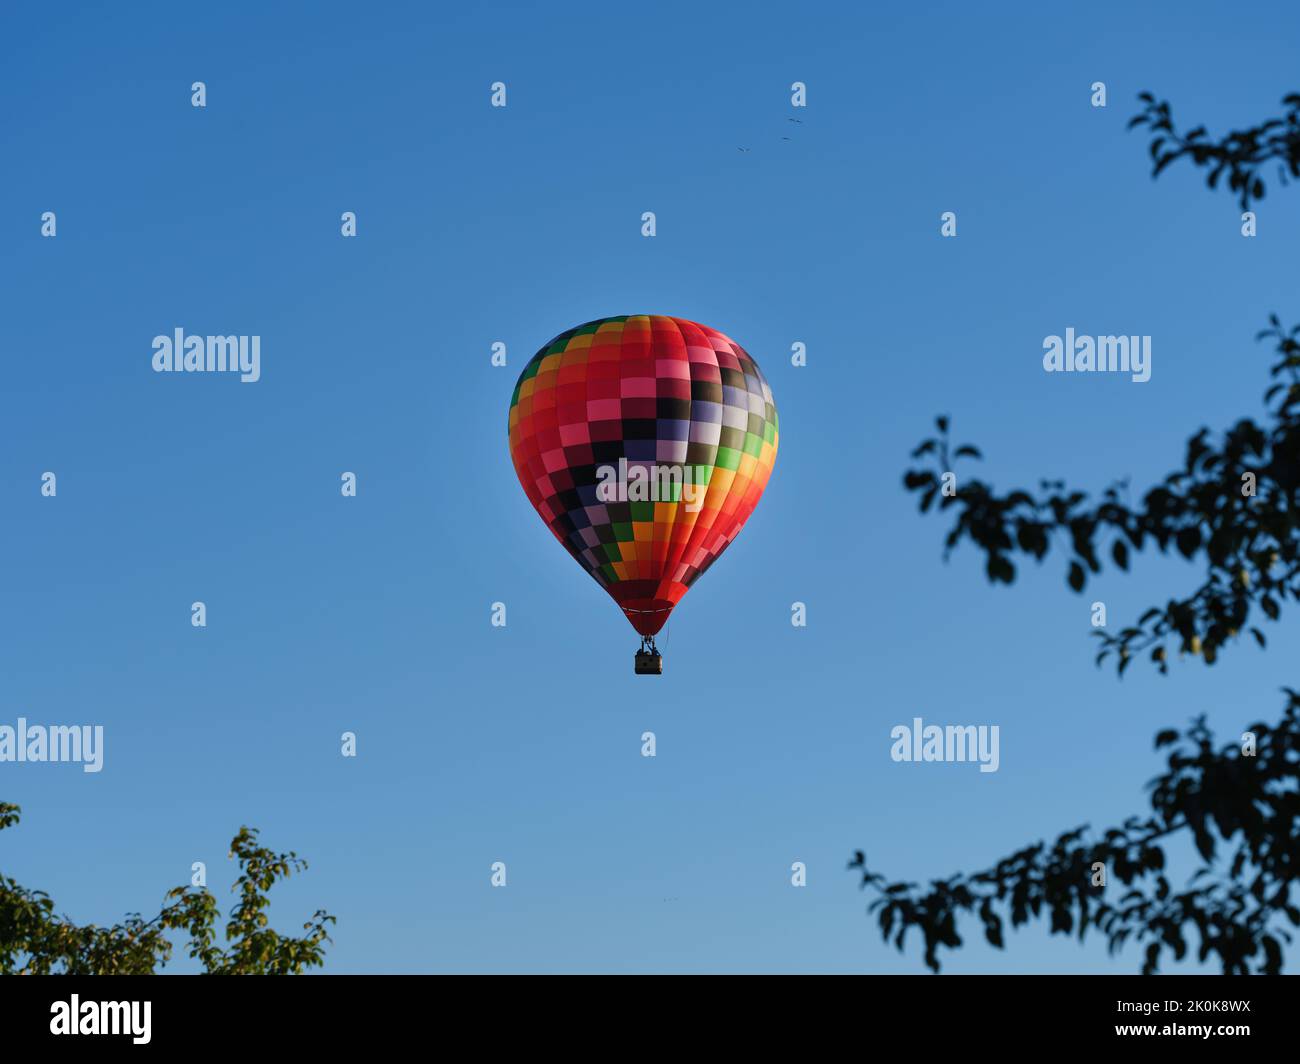 A colorful hot air balloon flying through the blue sky Stock Photo